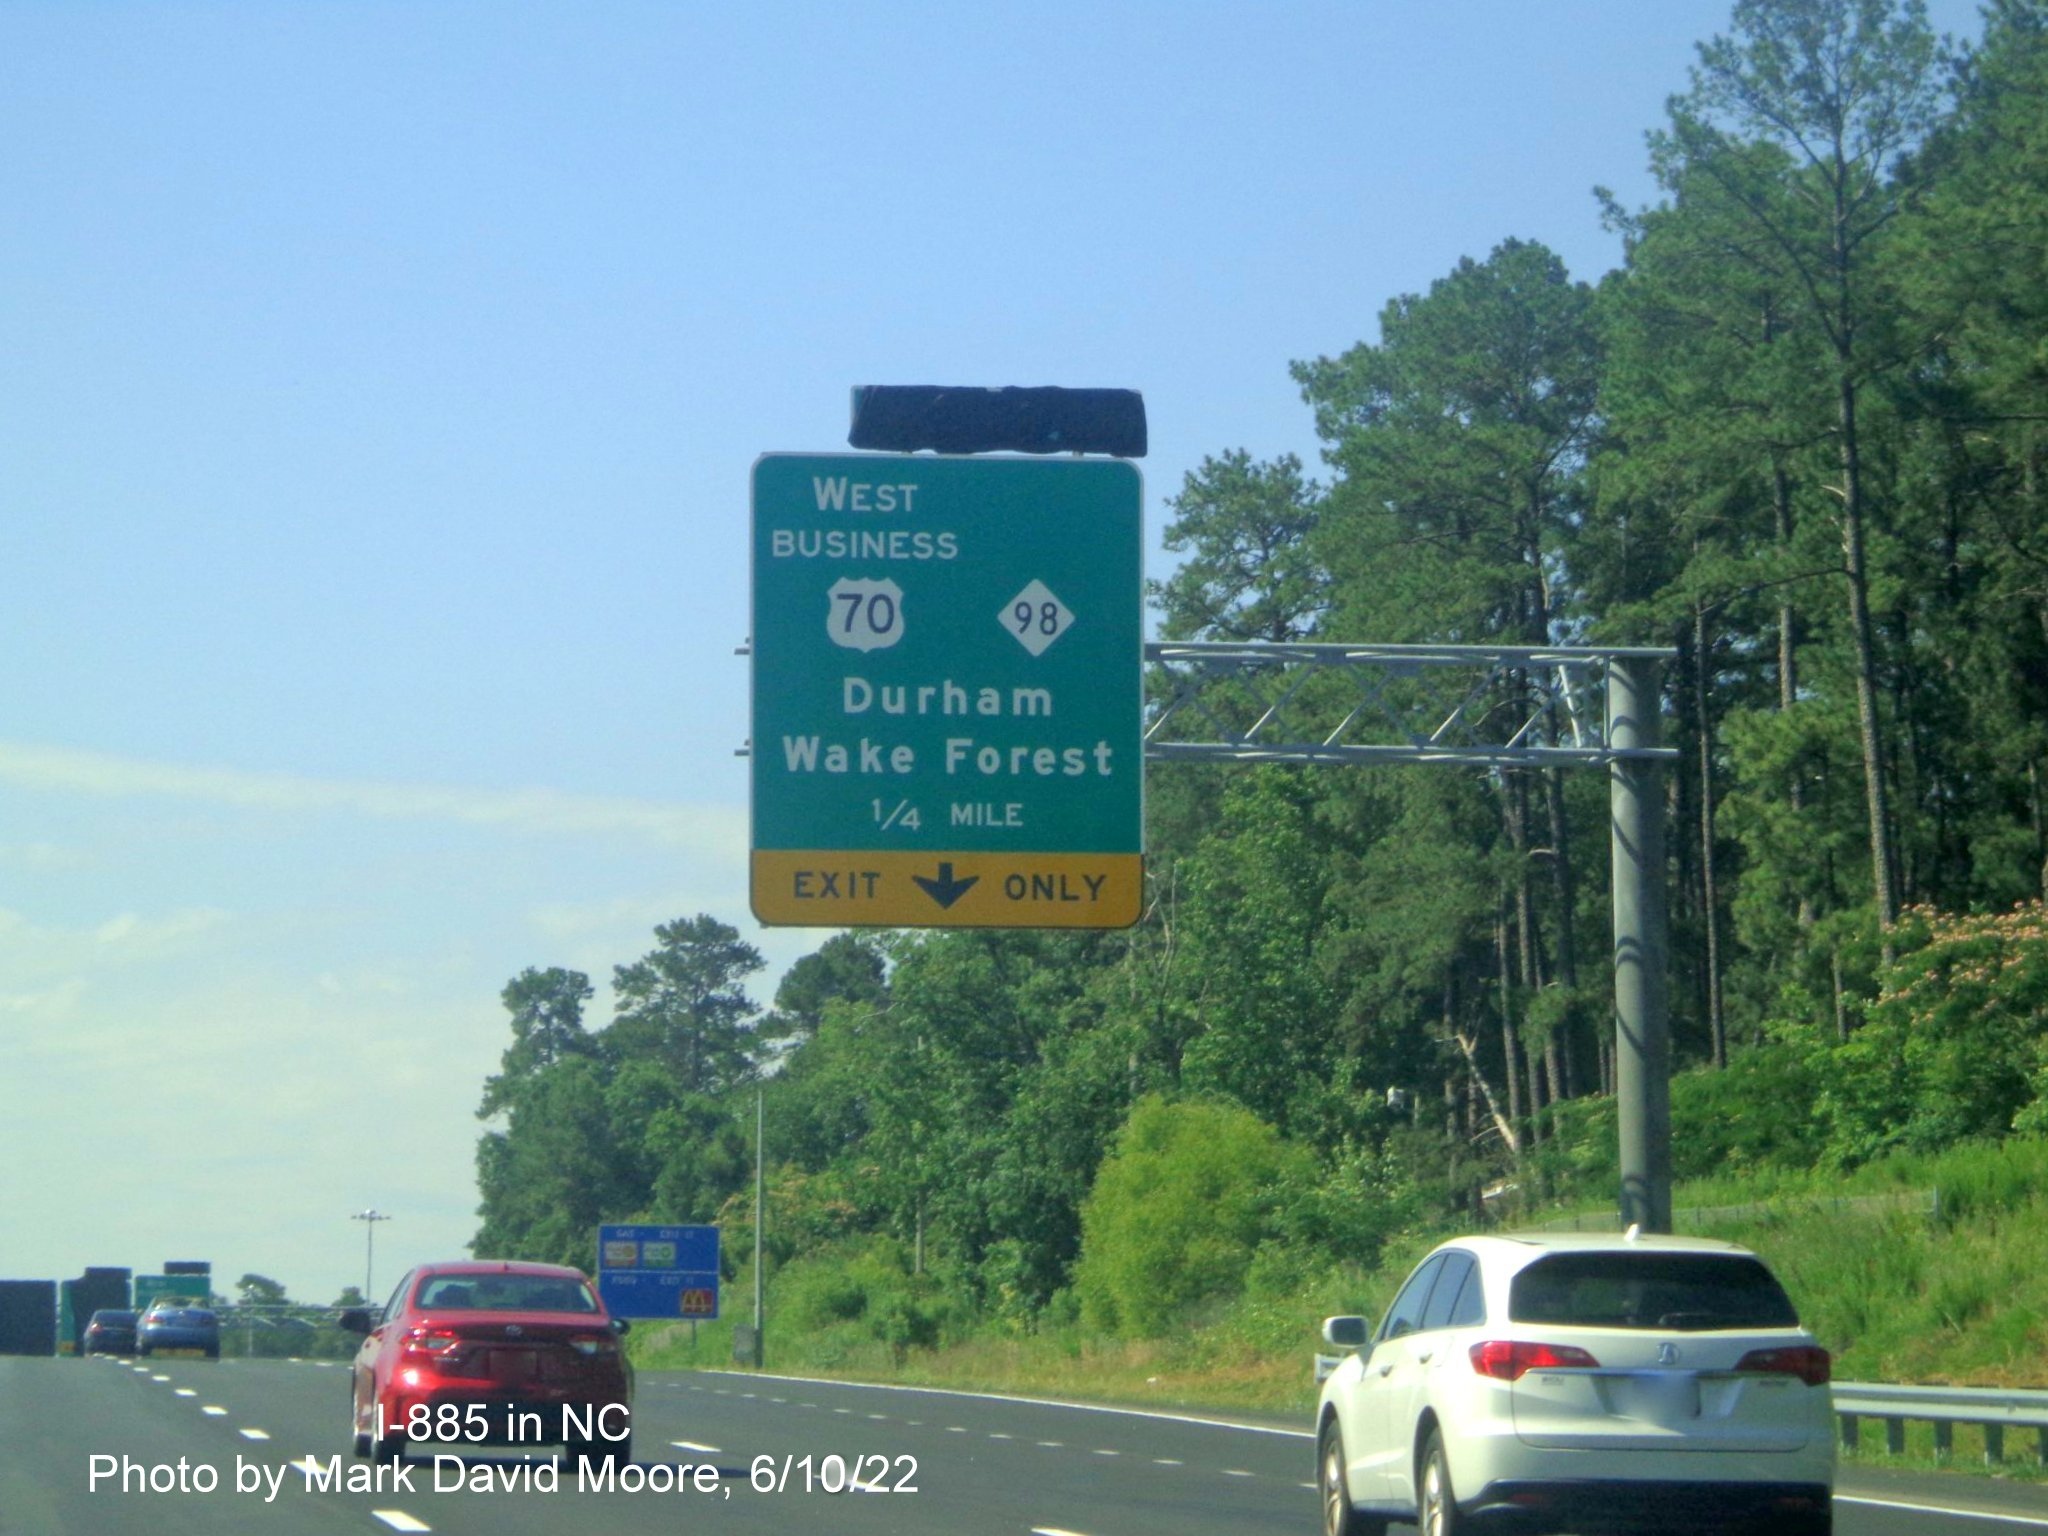 Image of 1/4 mile advance overhead sign for US 70 Bus. West/NC 98 exit
        still covered over on Future I-885 South/US 70 East in Durham, by Mark David Moore June 2022